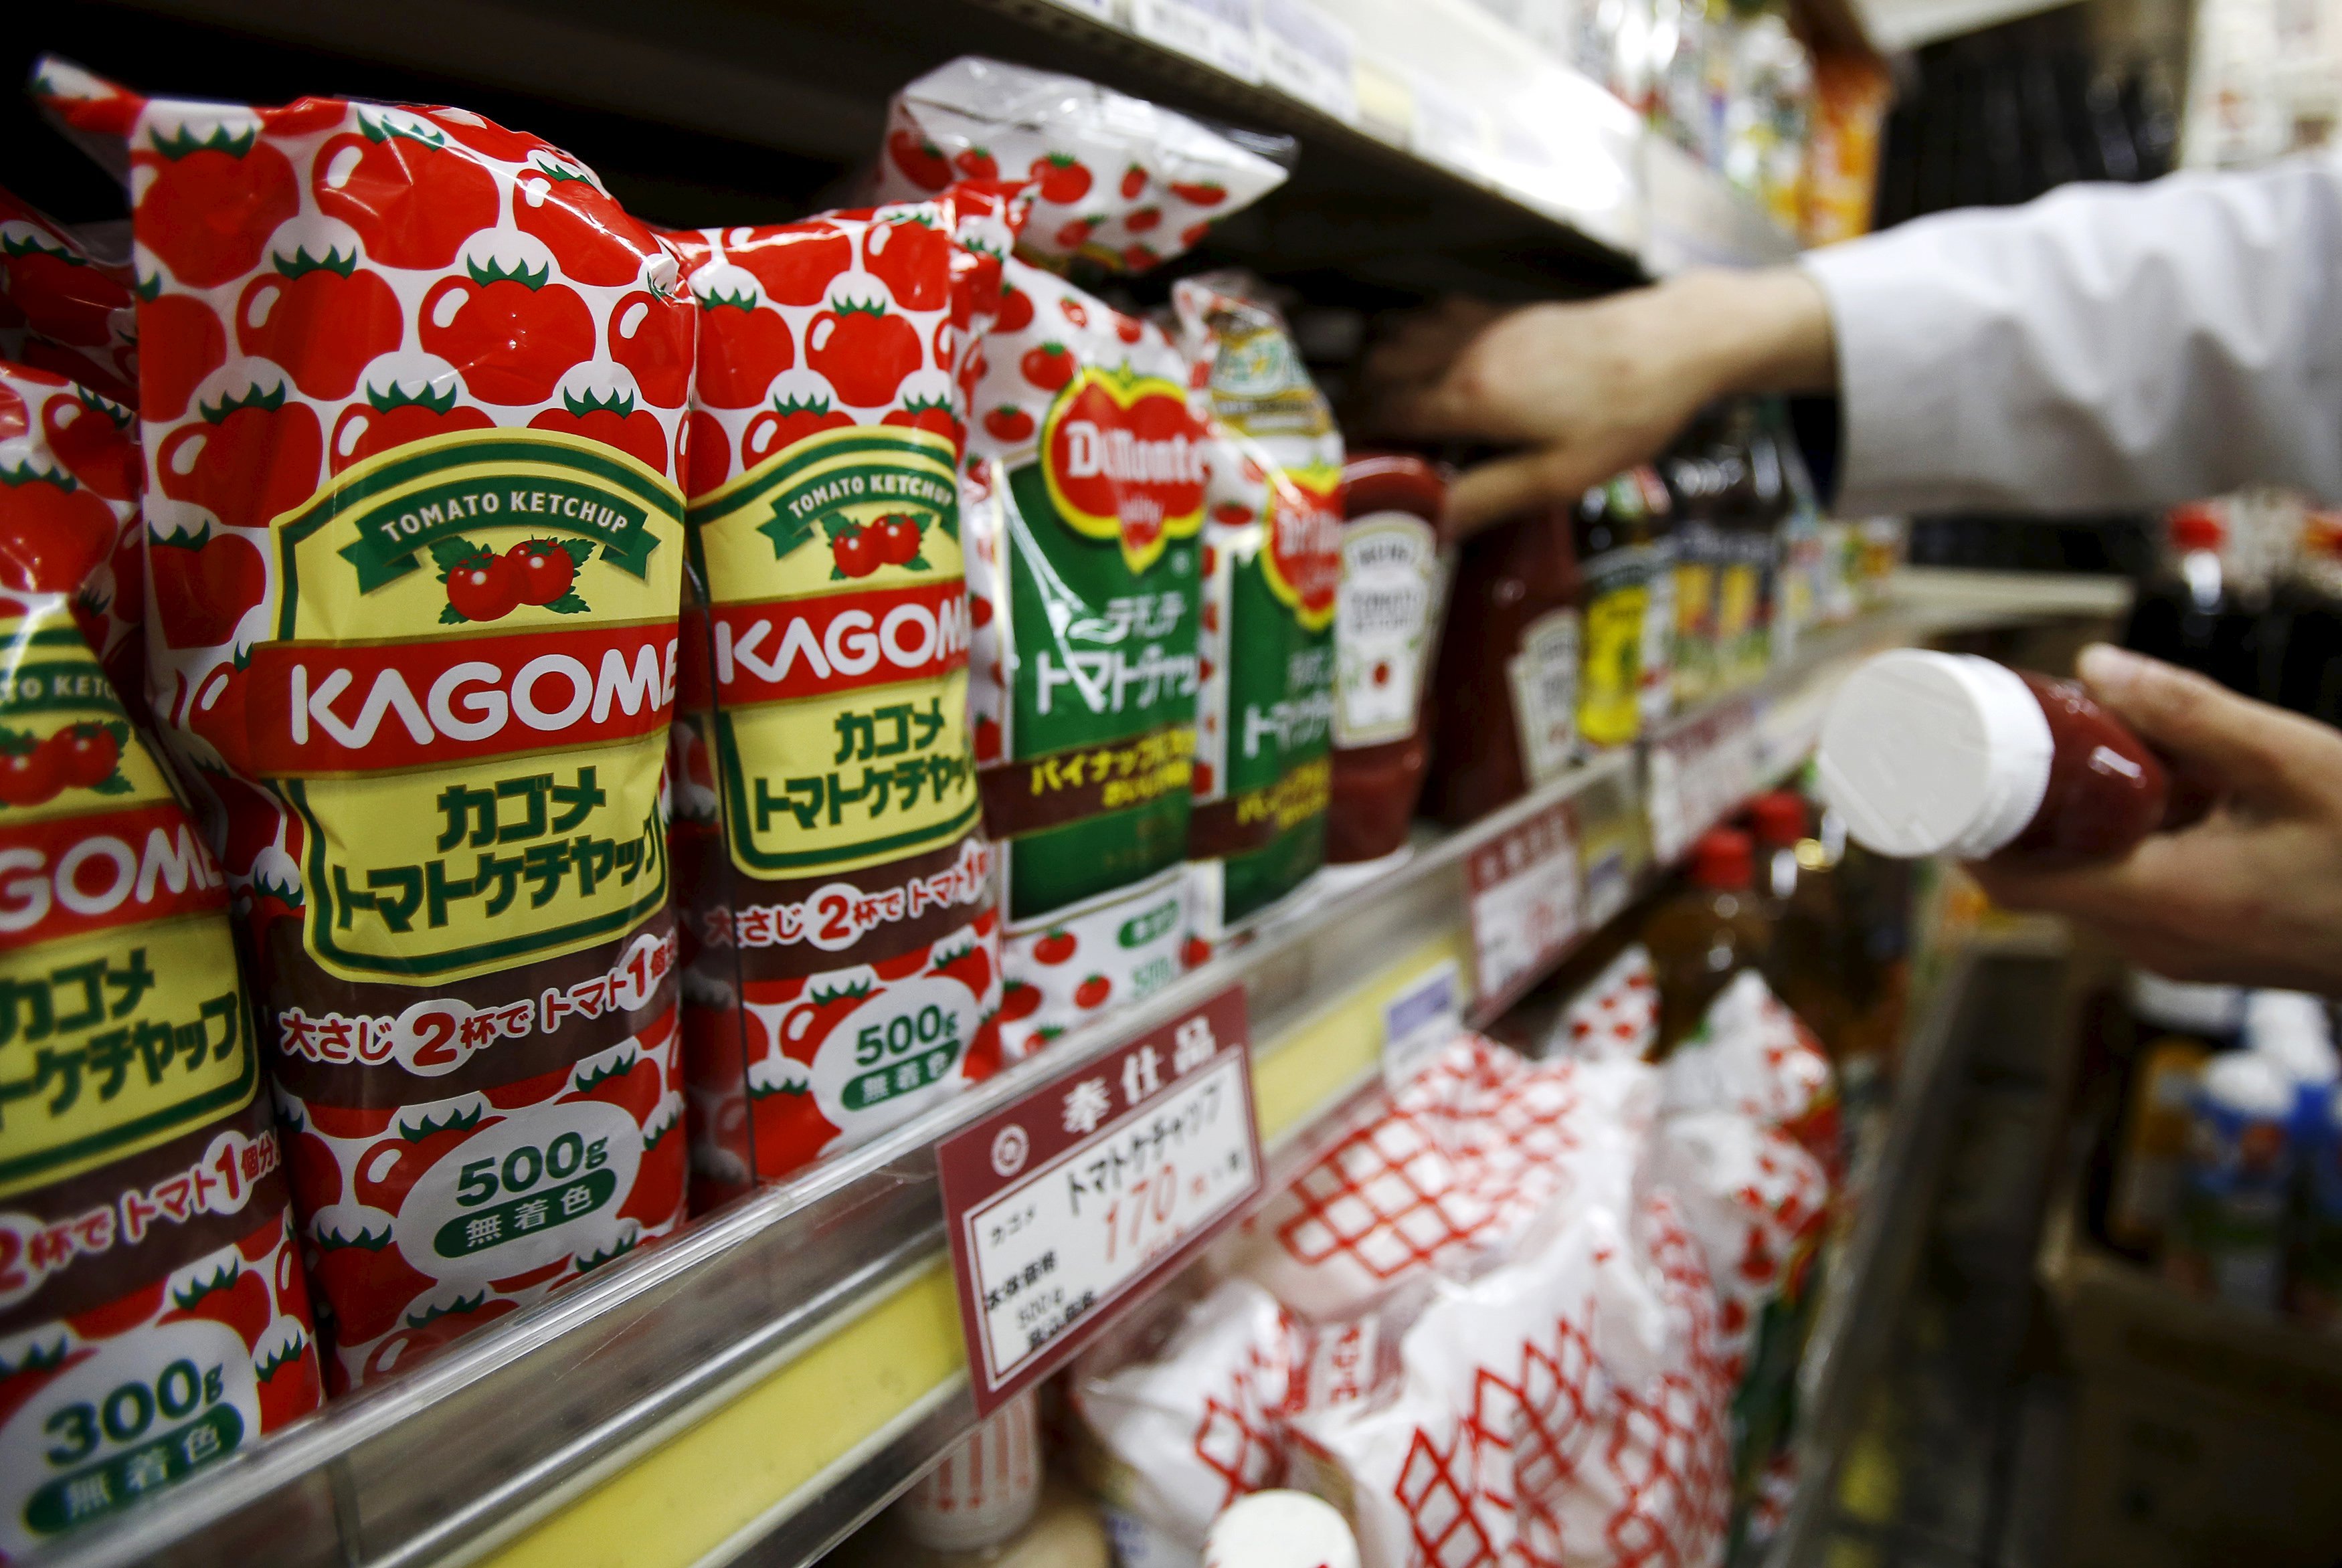 Kagome's tomato ketchup bottles (L) are displayed with their price tag at Yoshiike supermarket in Tokyo as the Bank of Japan is taking advantage of a gradual rise in food prices, from yogurt and ketchup to "gyudon" beef rice bowls to say inflation is picking up. Photo: Reuters